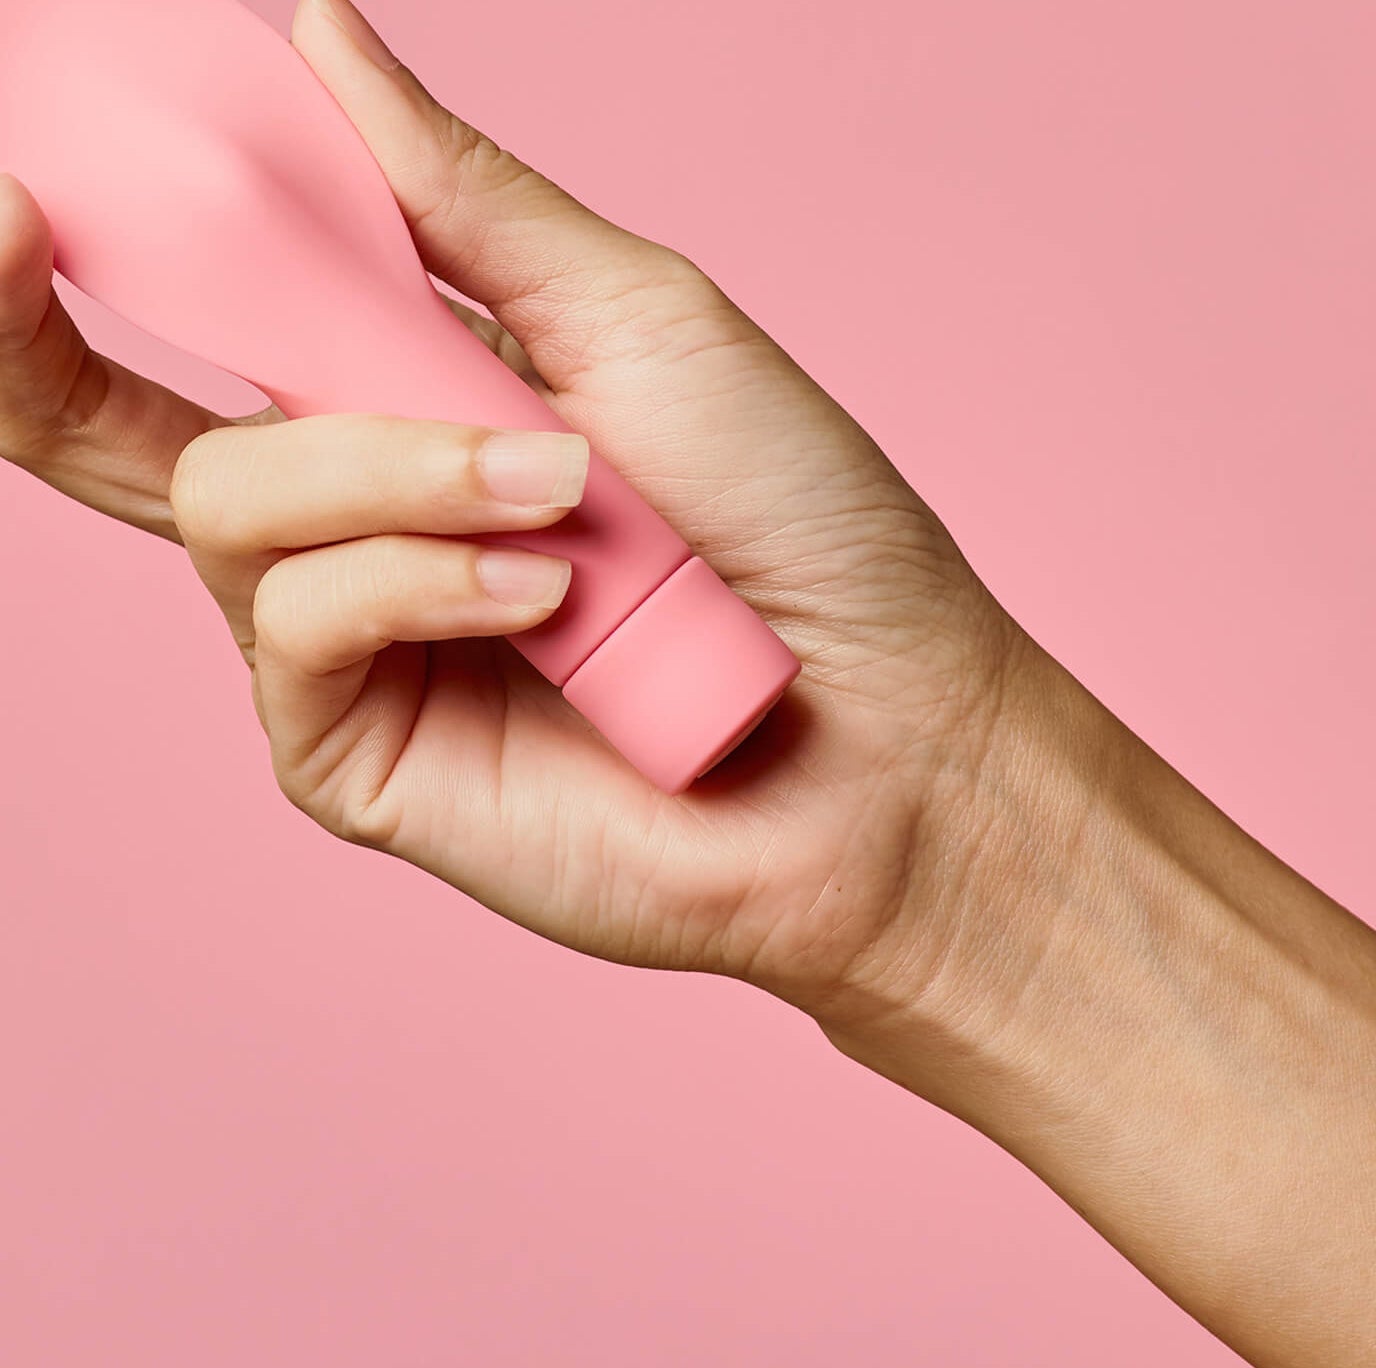 A person holding up the vibrator